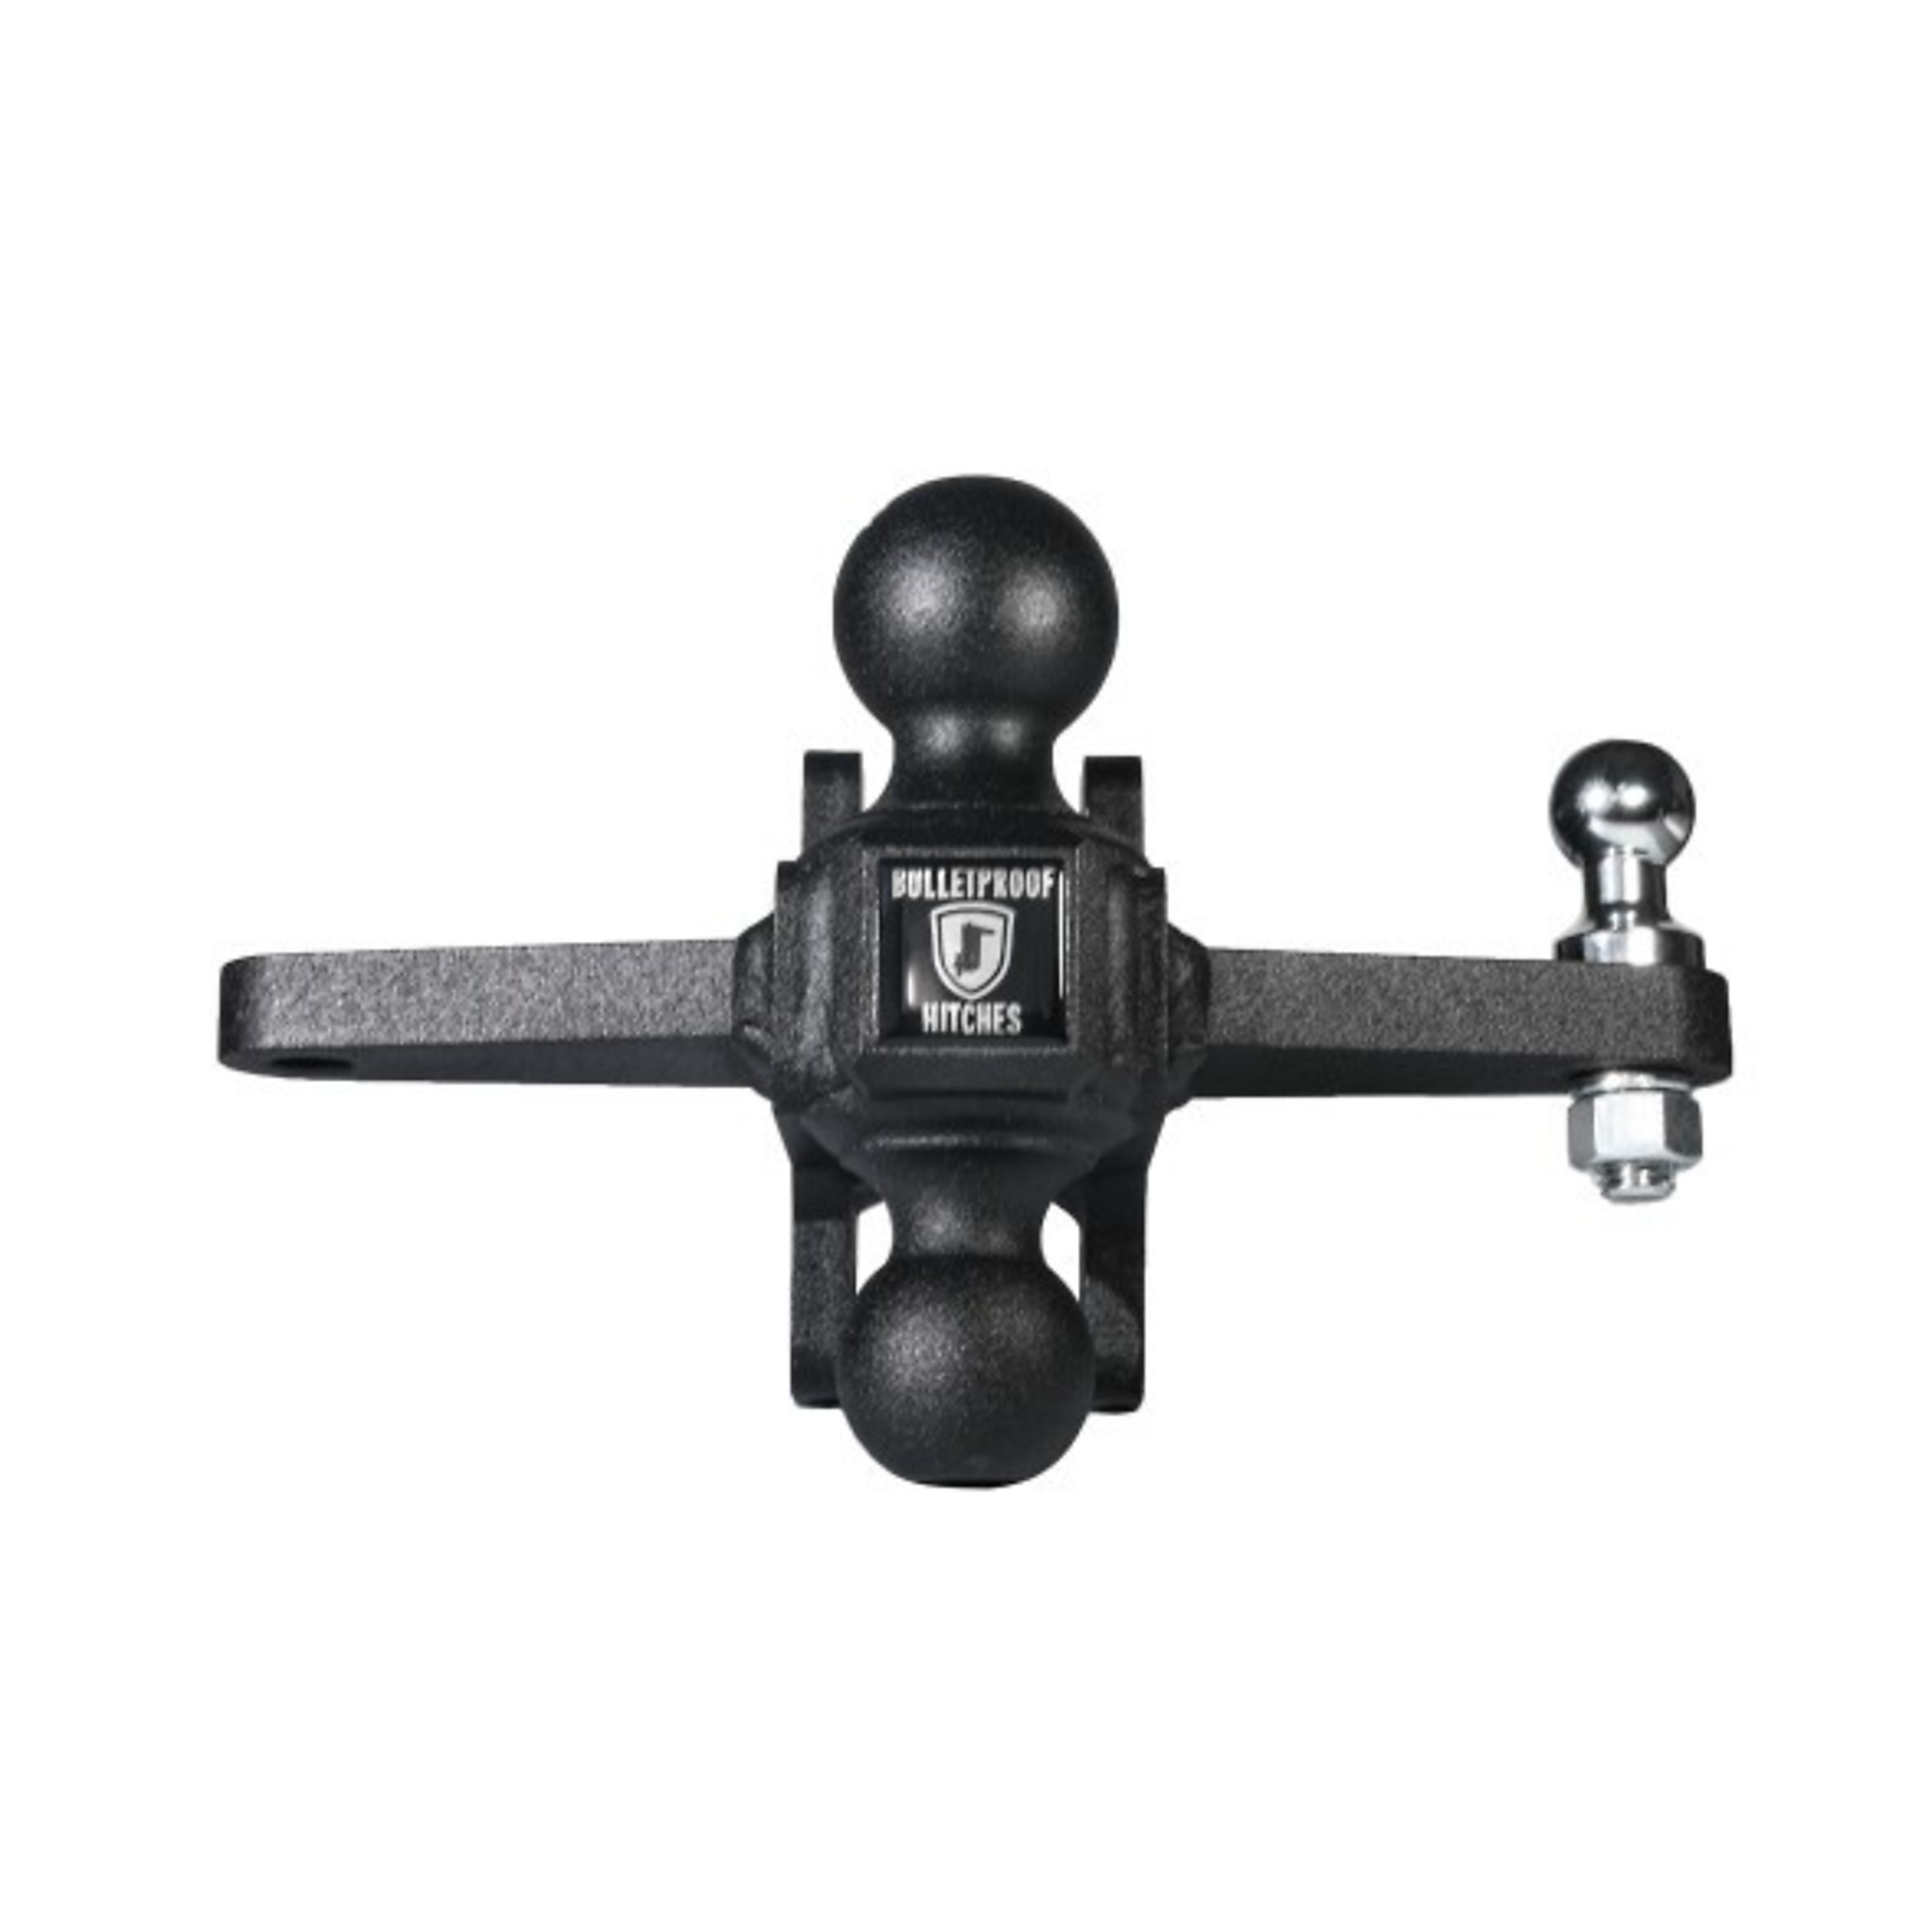 BulletProof Hitches, HEAVY/EXTREME DUTY SWAY CONTROL BALL MOUNT, Fits Receiver Size Multiple in, Model SWAYCONTROLLBALL